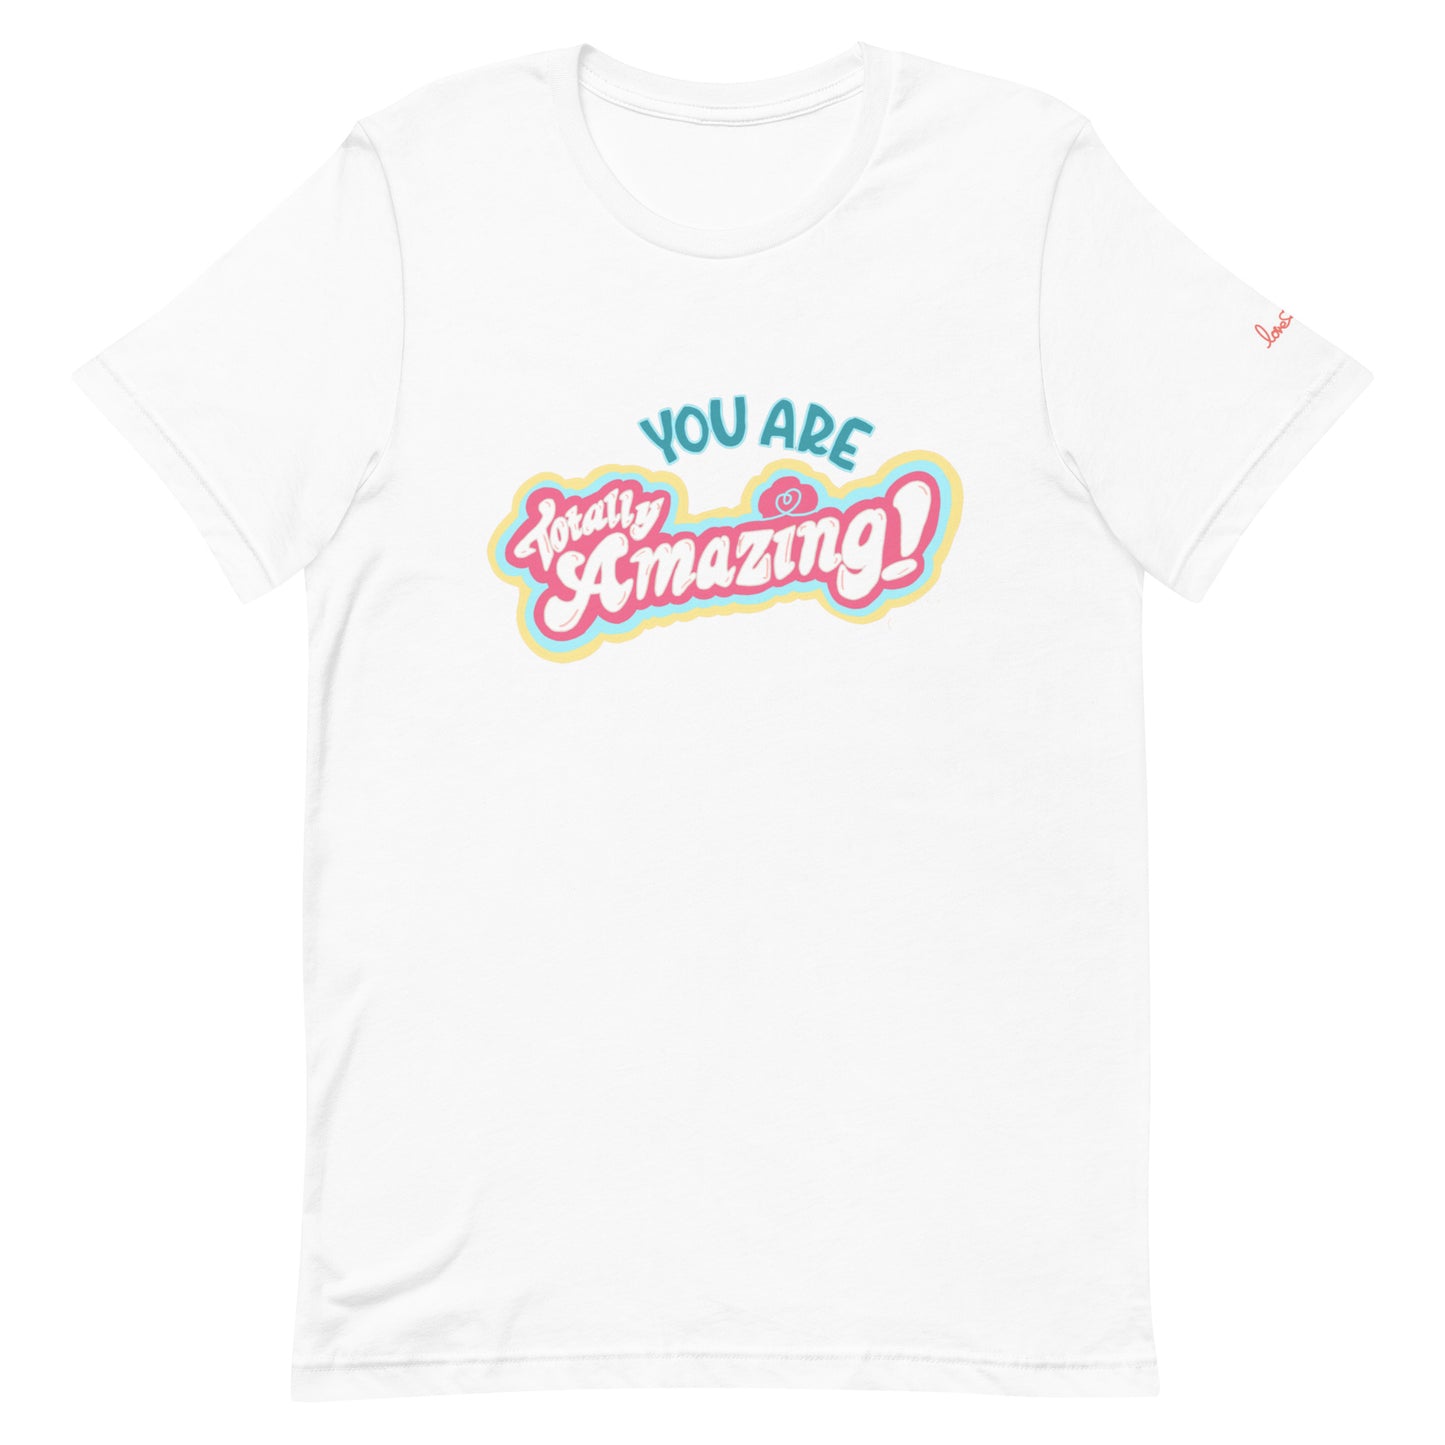 You are totally amazing t-shirt